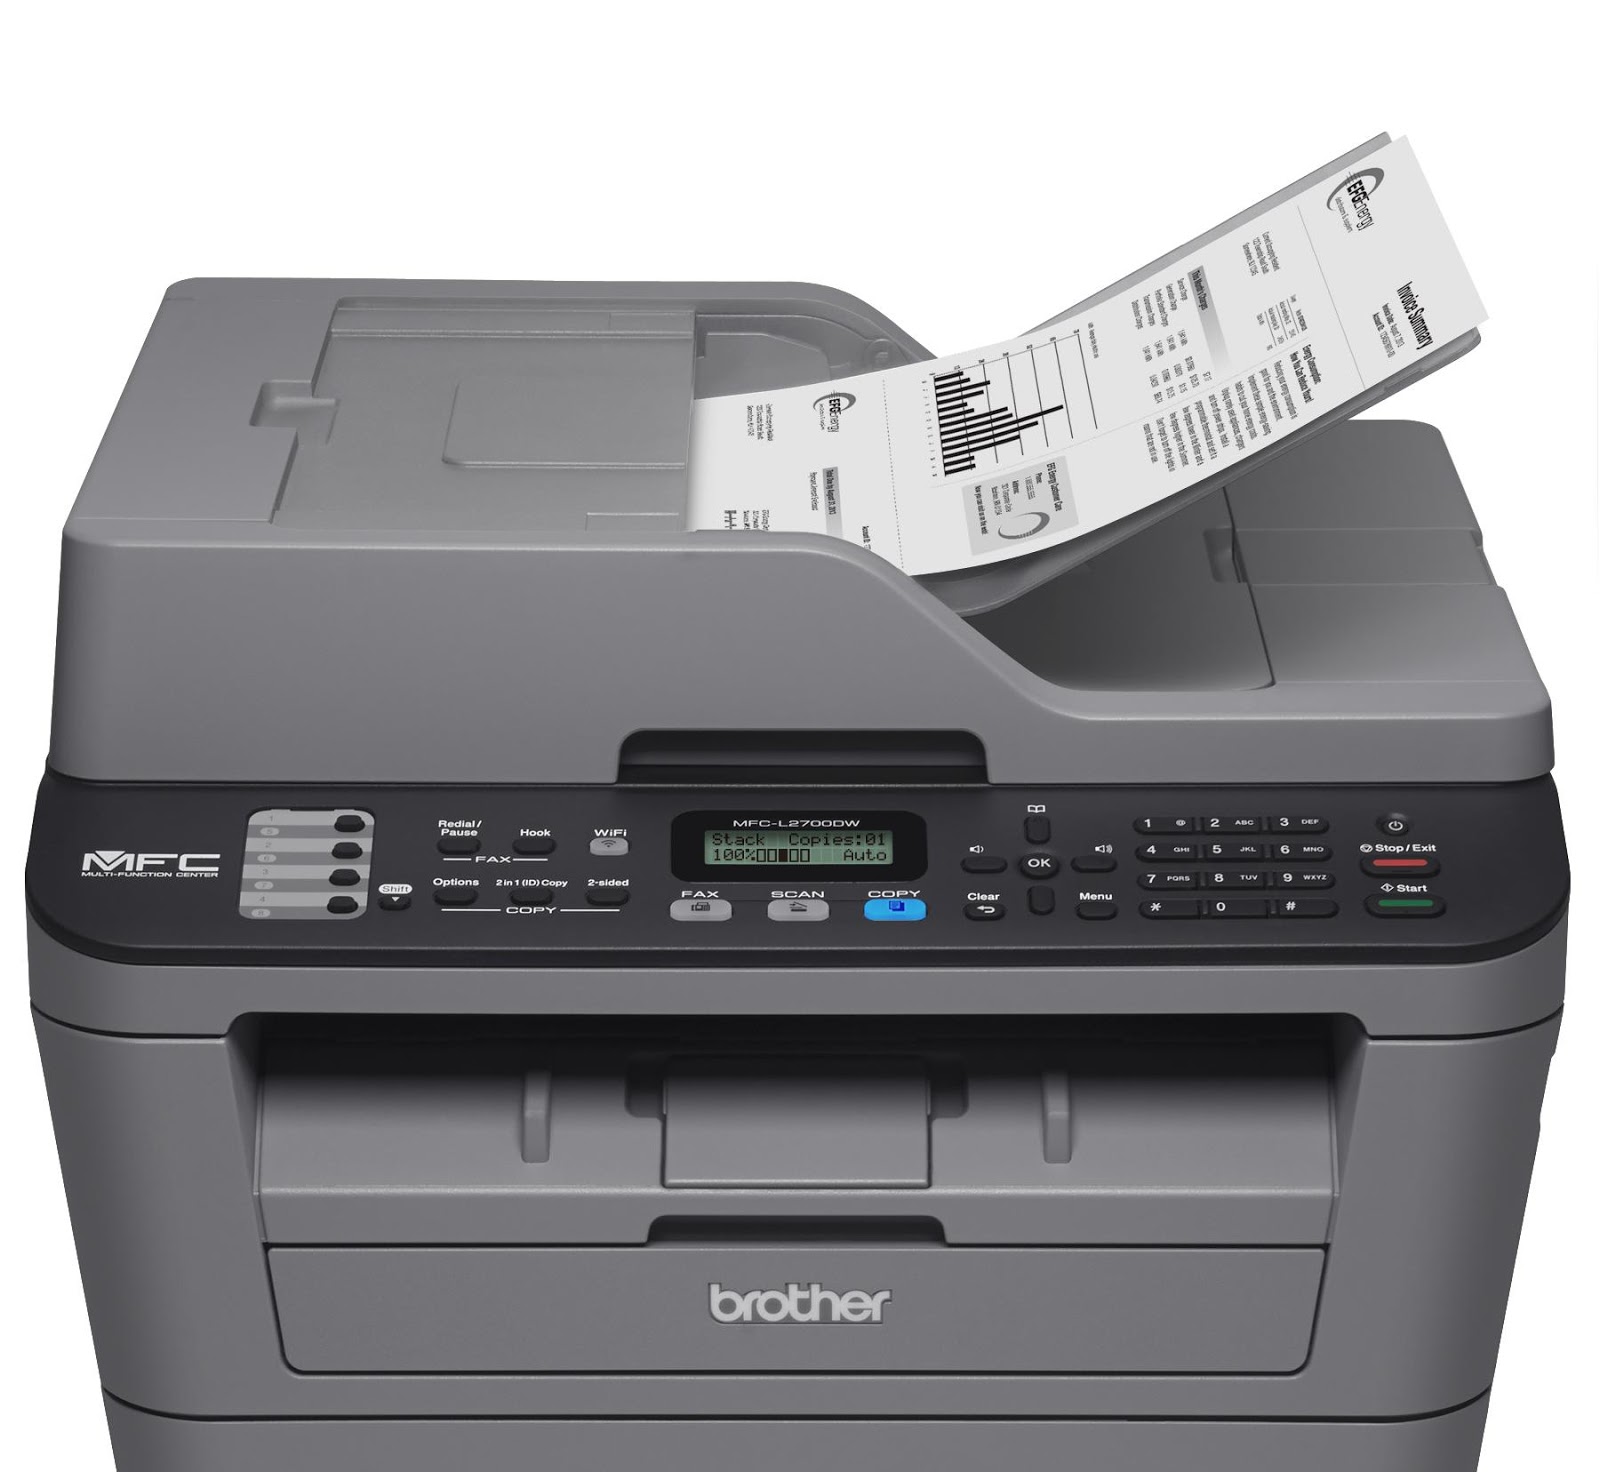 Solve Brother MFC 2700 DW Toner Replace error 100%